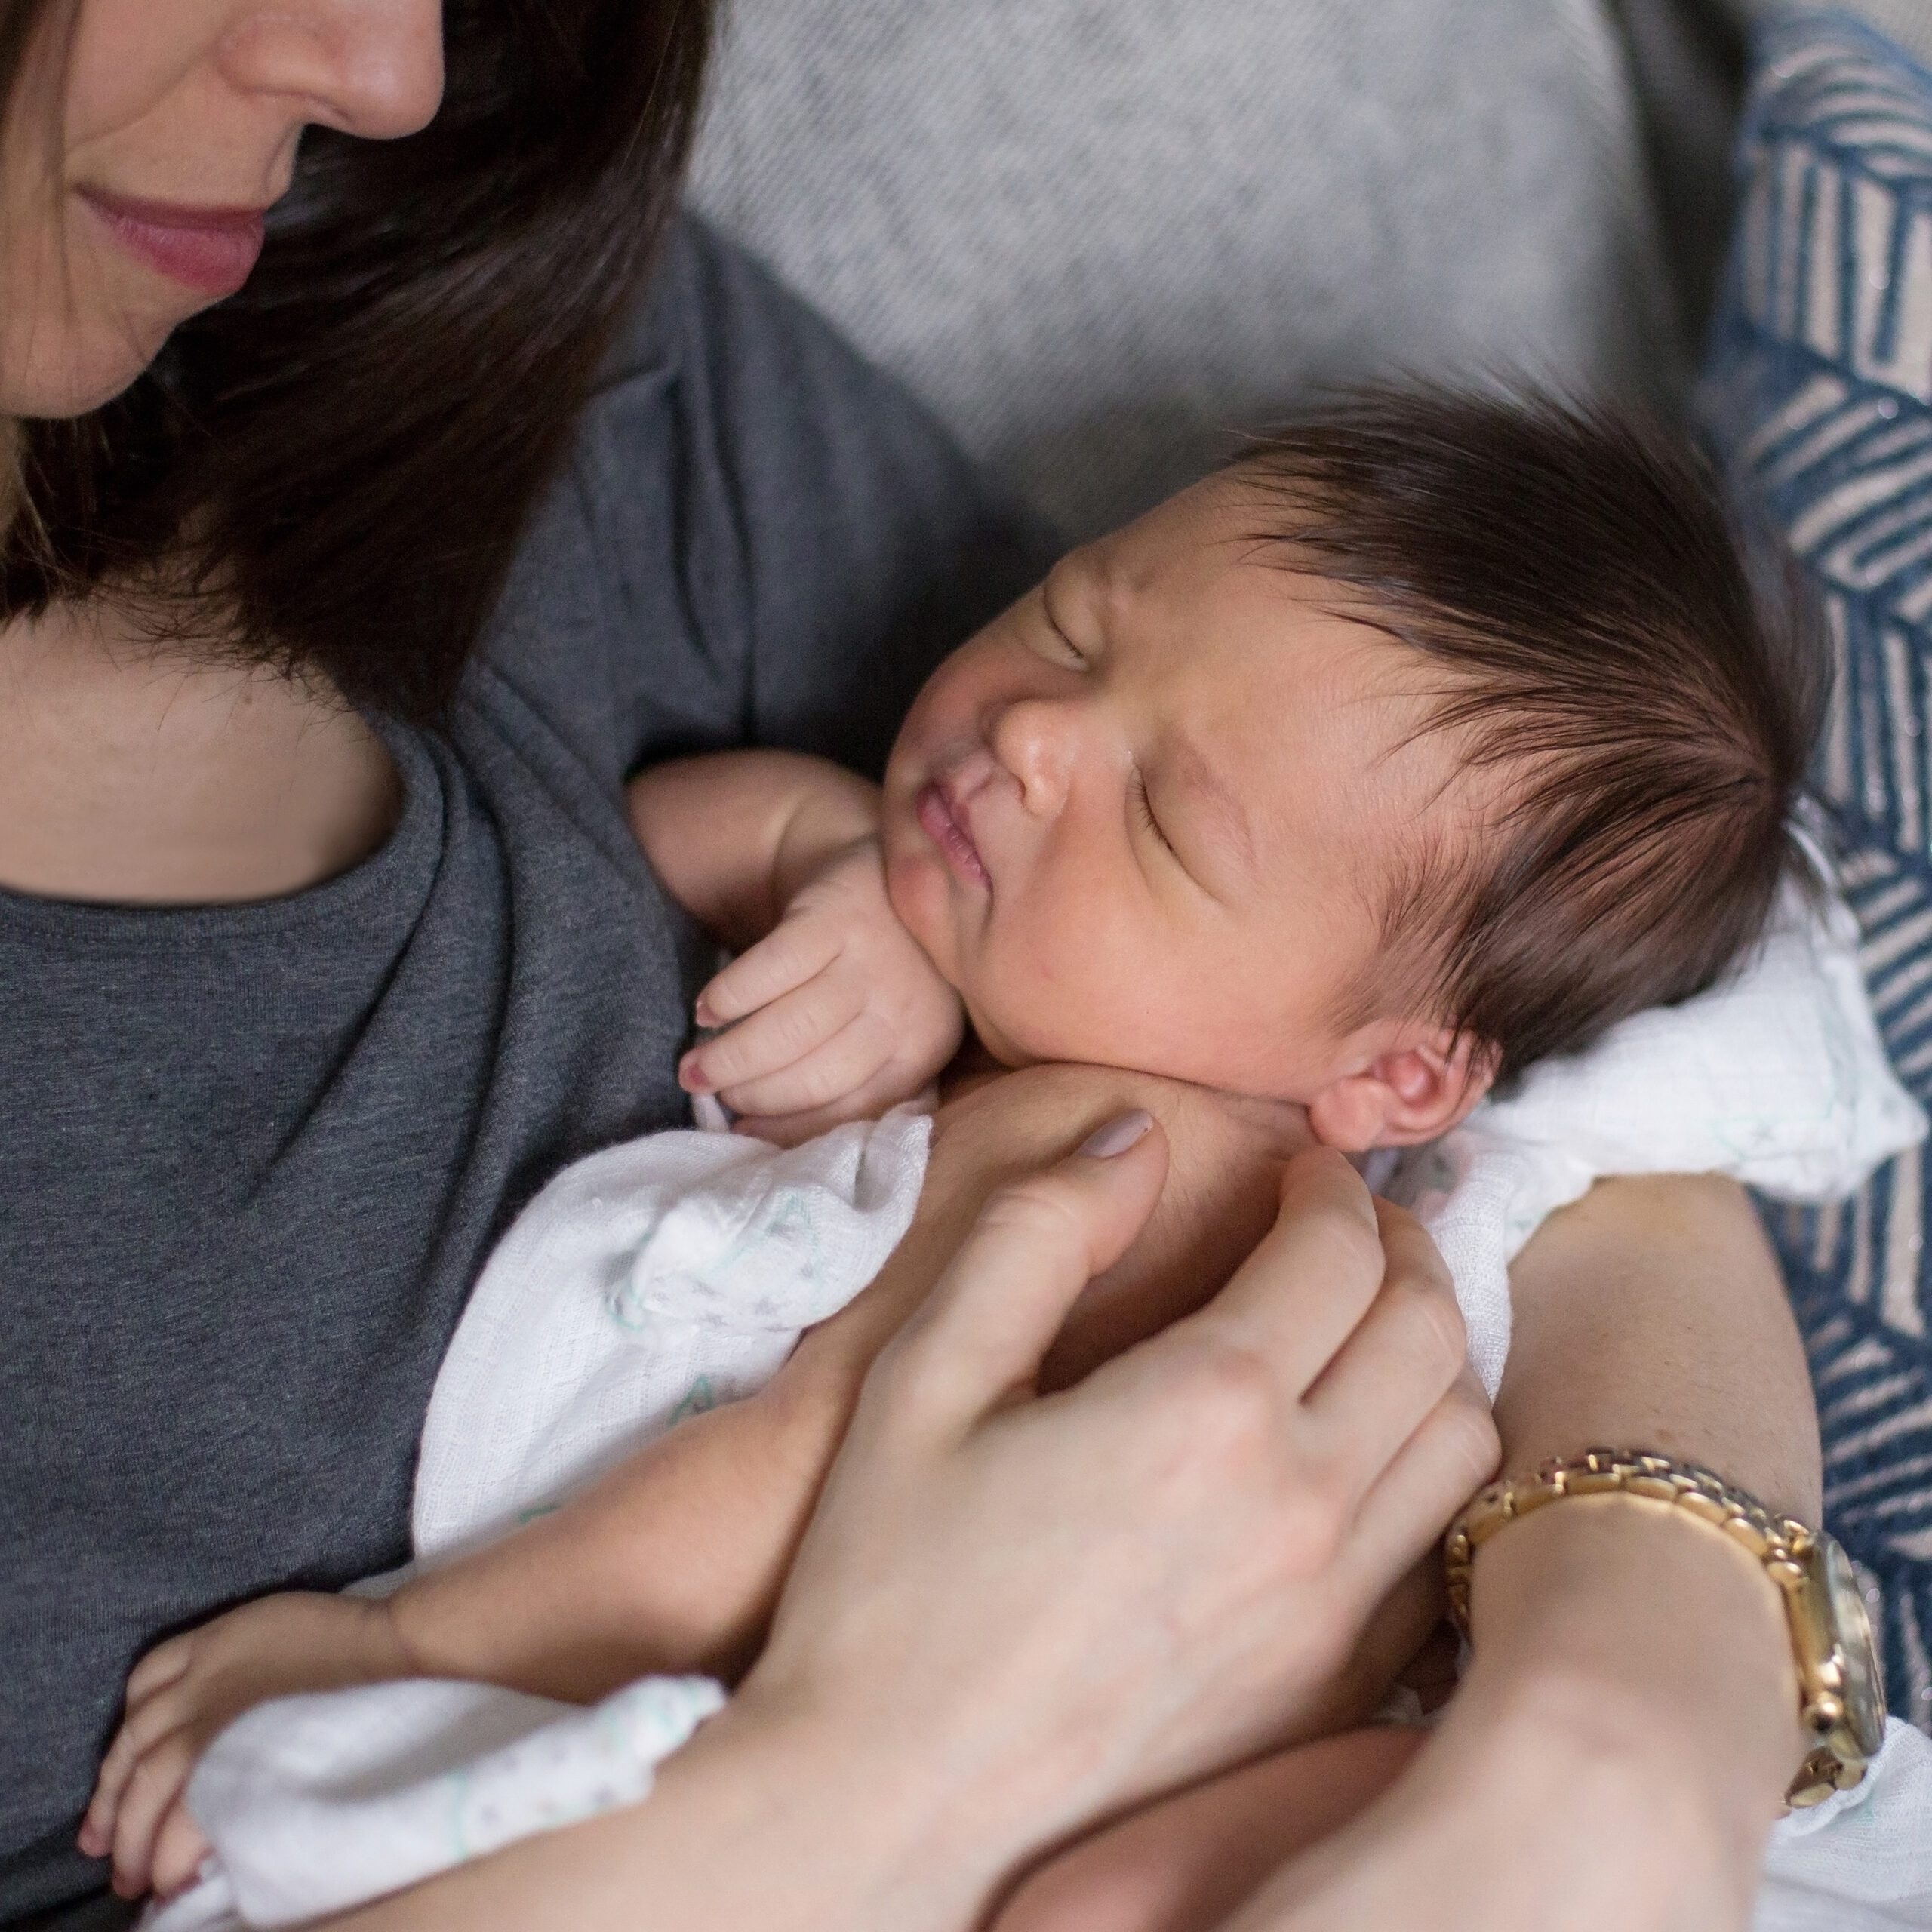 newborn baby with lots of brown hair being cradled by mom